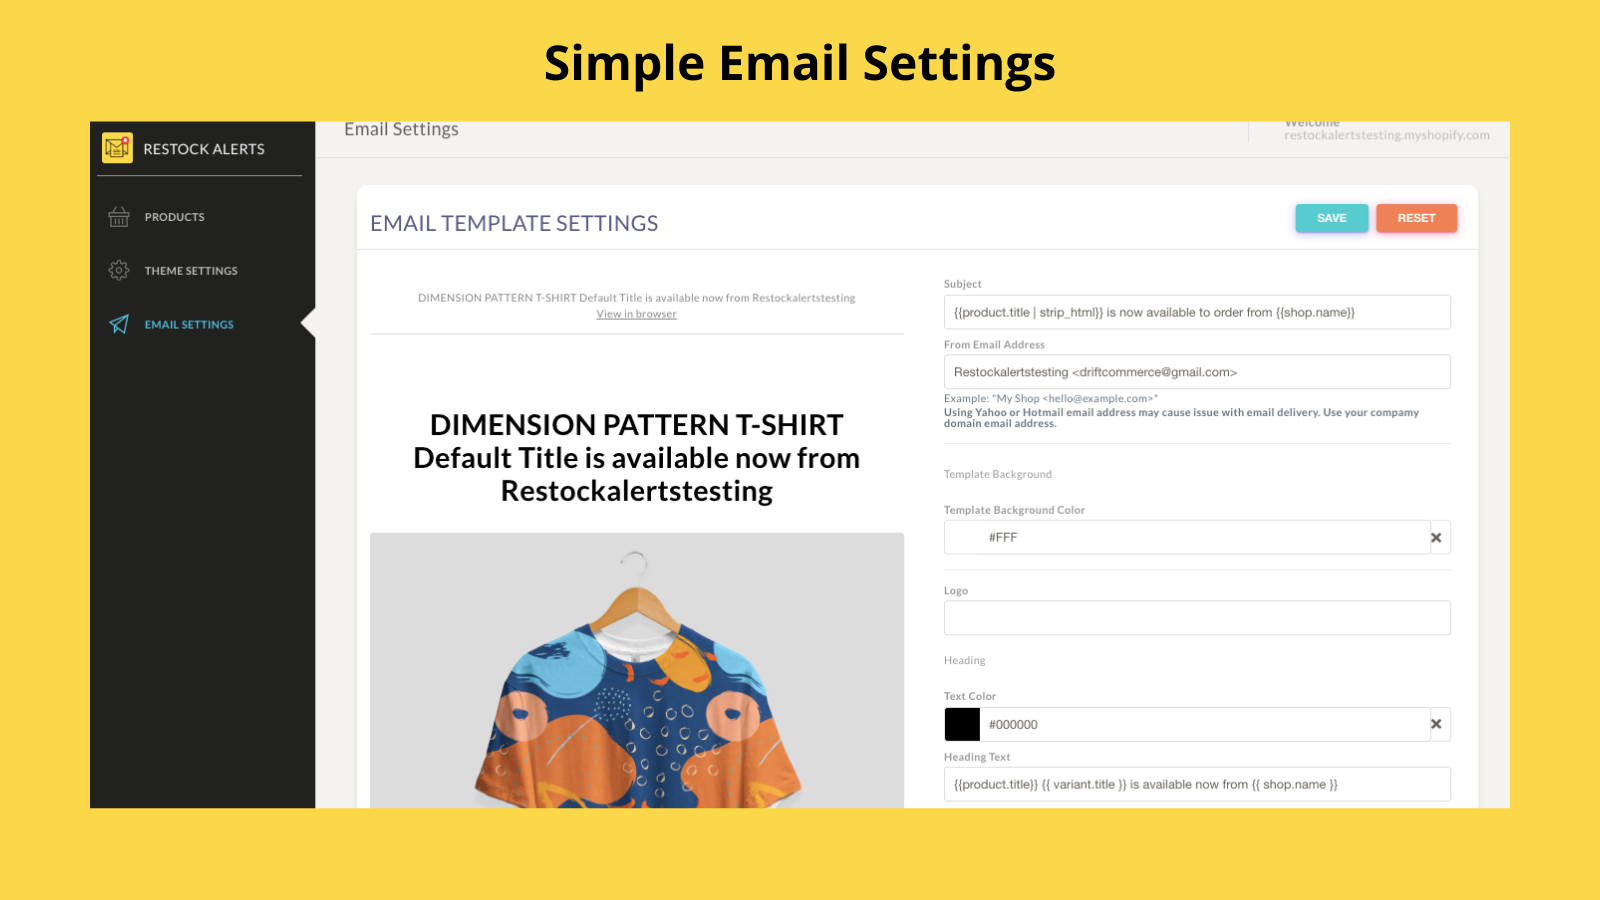 Simple Email Settings